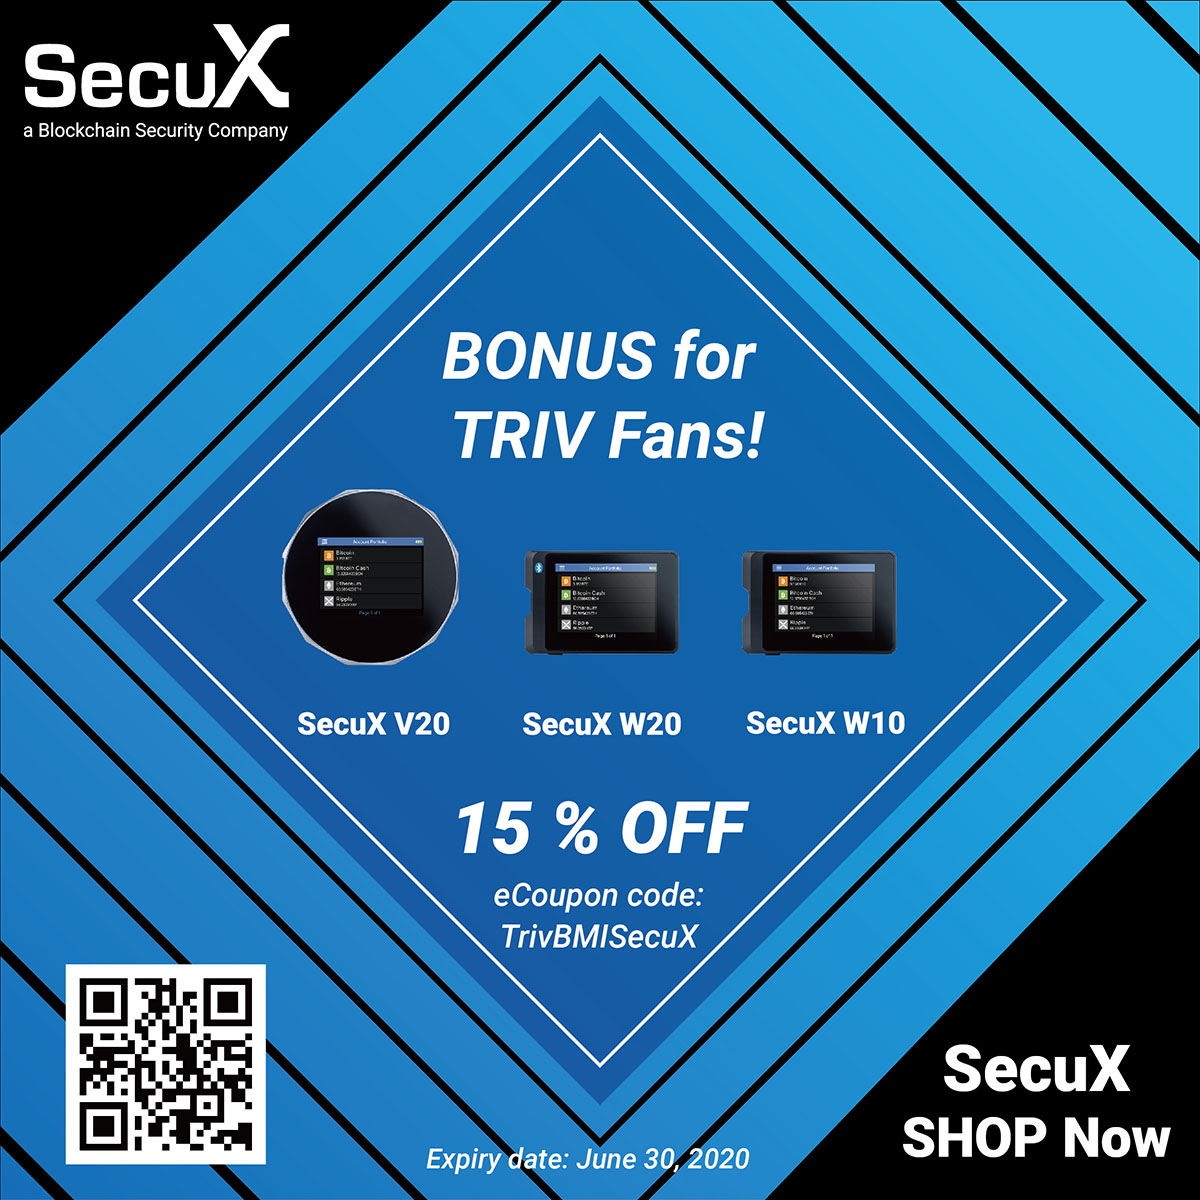 SecuX Crypto Hardware Wallet SHOP